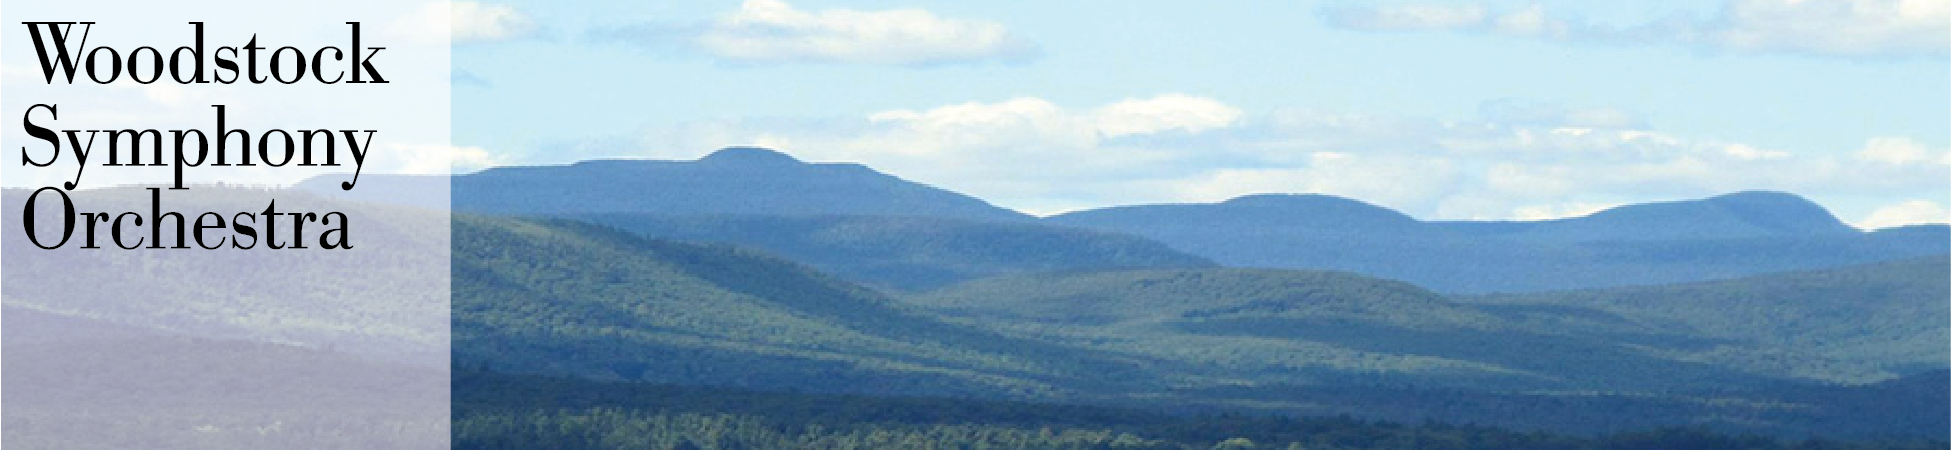 Catskill Mountains with Woodstock Symphony Orchestra logo